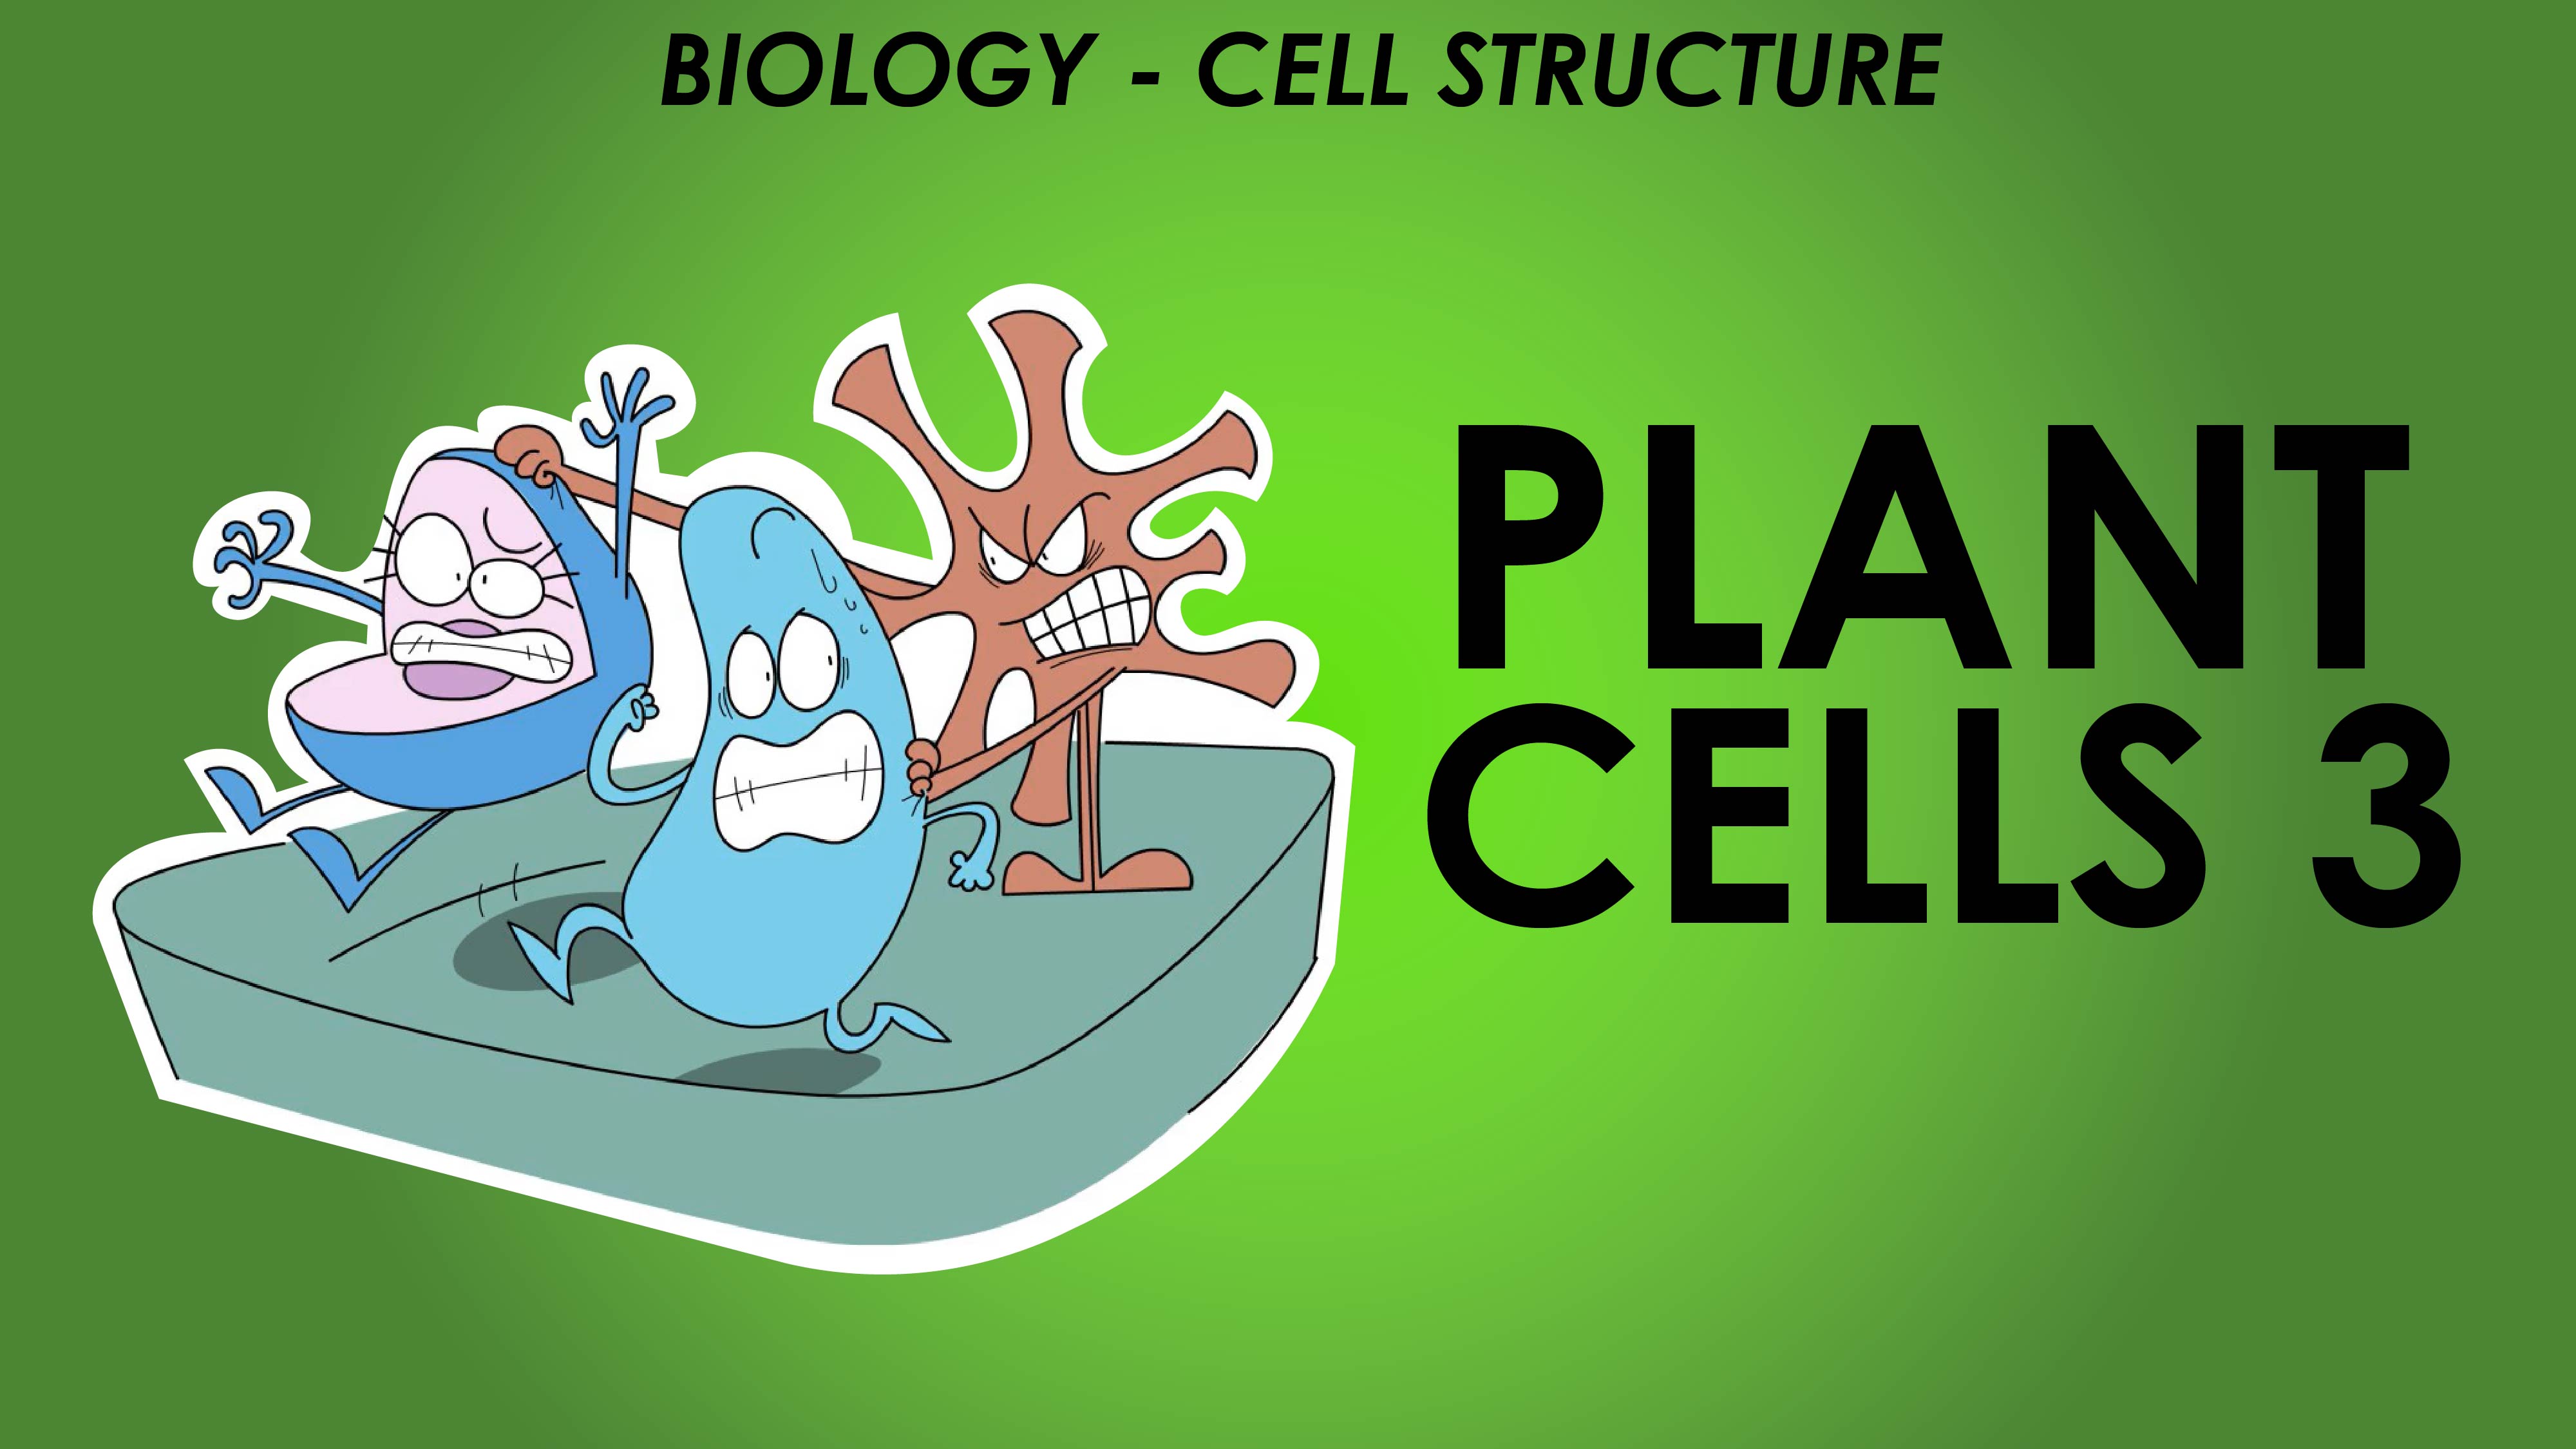 Plant Cells 3 - Cell Structure